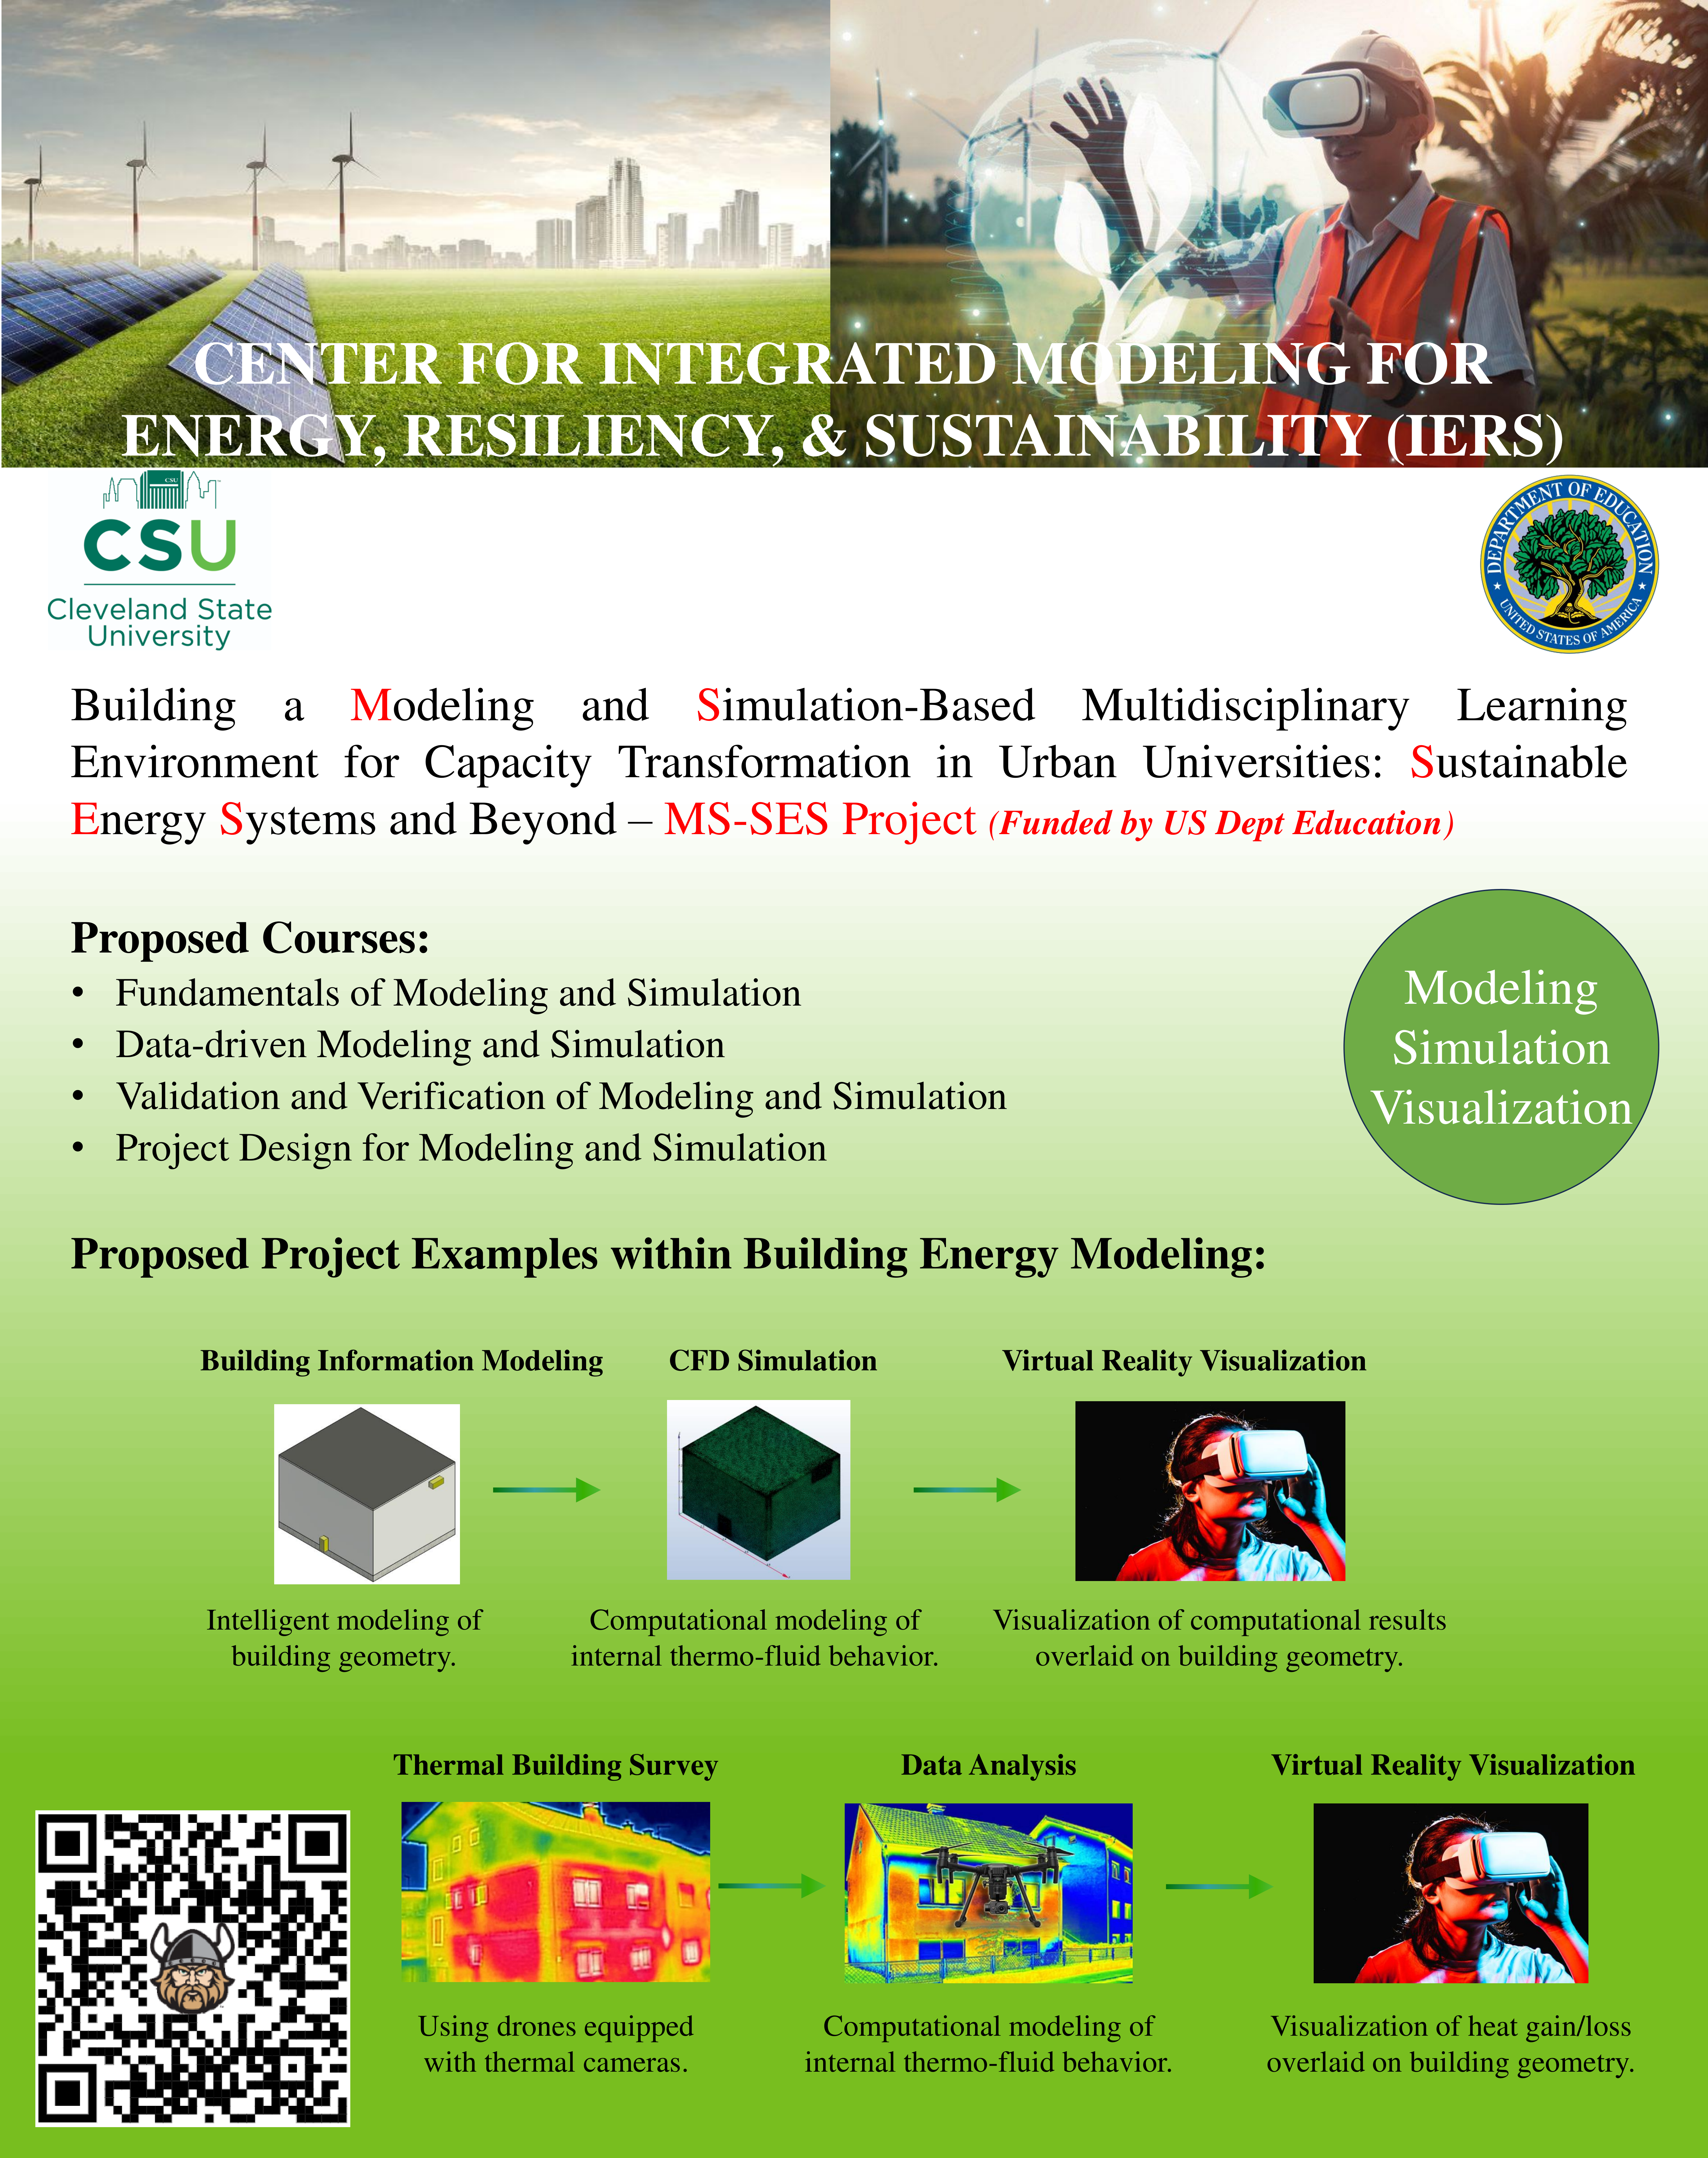 CENTER FOR INTEGRATED MODELING FOR ENERGY, RESILIENCY AND SUSTAINABILITY (IERS)